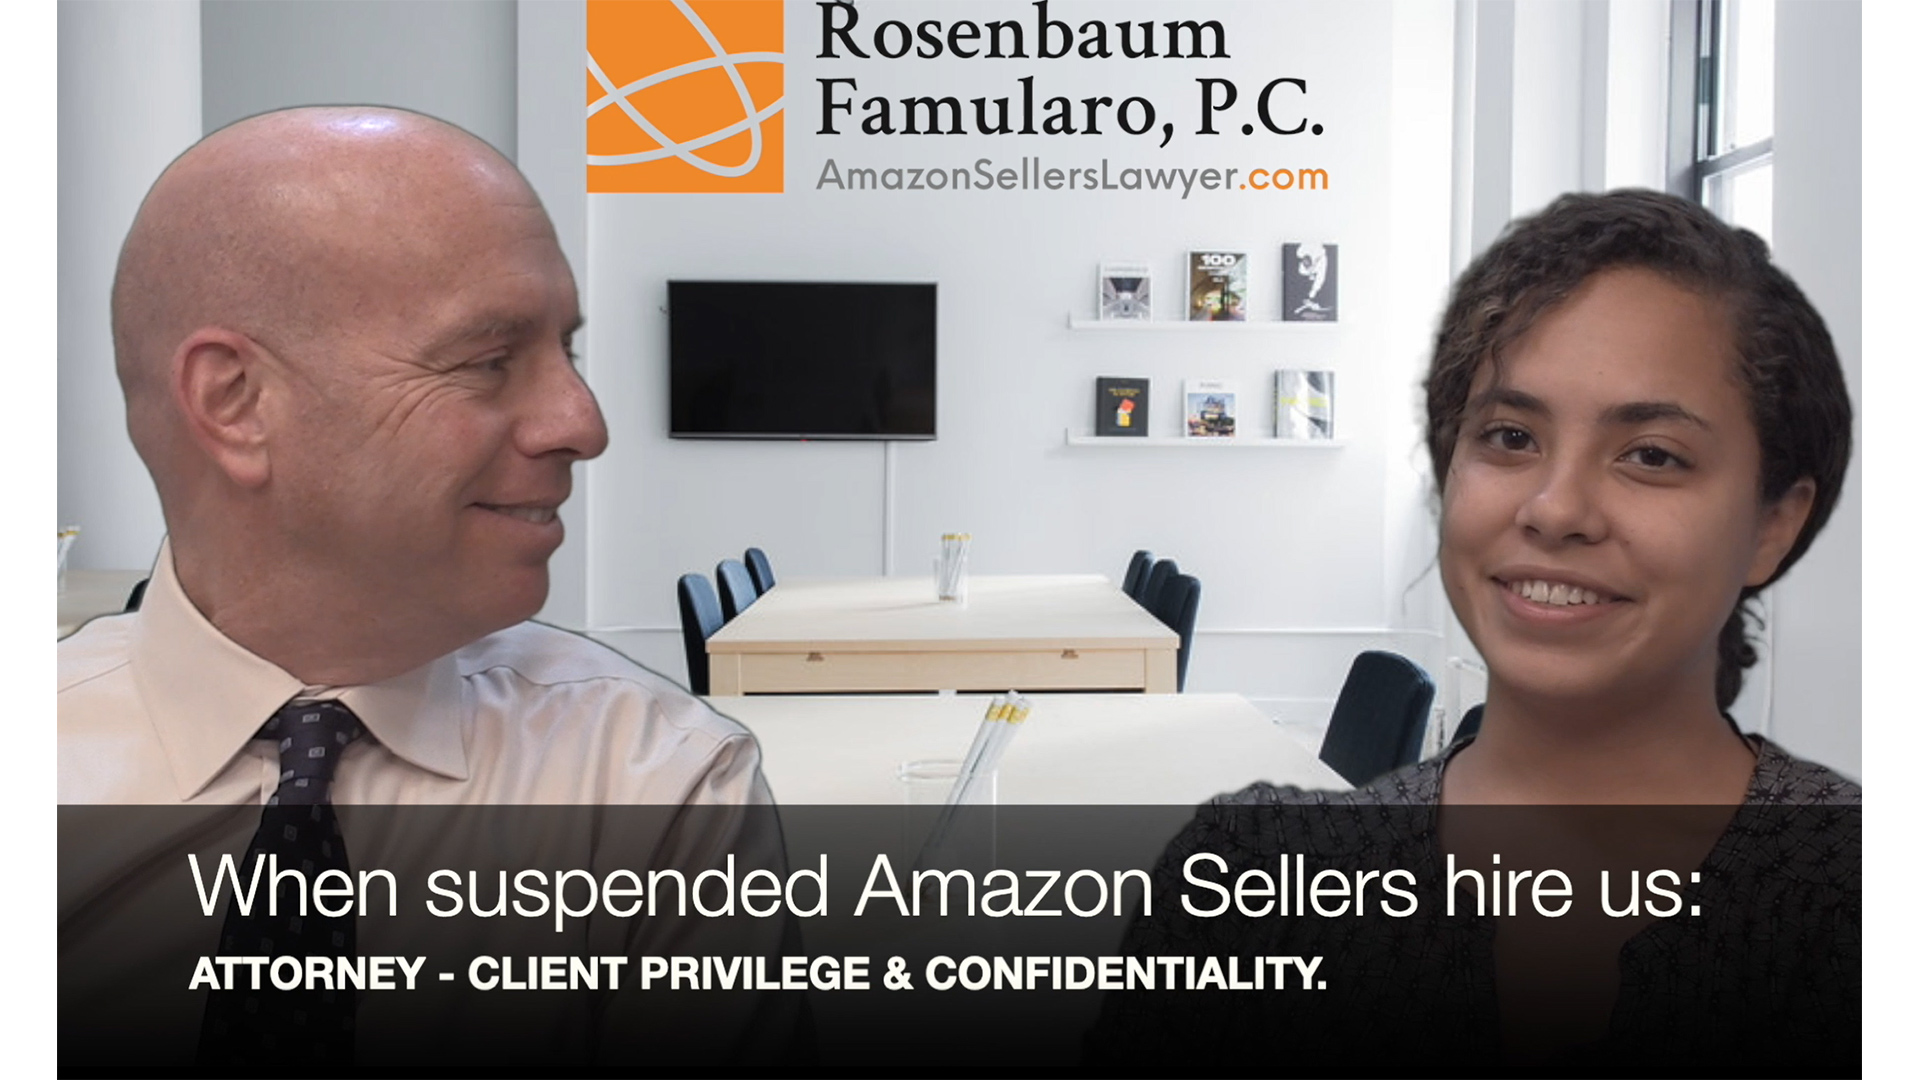 Learn How our Winning POA Reinstated an Amazon Seller’s Account